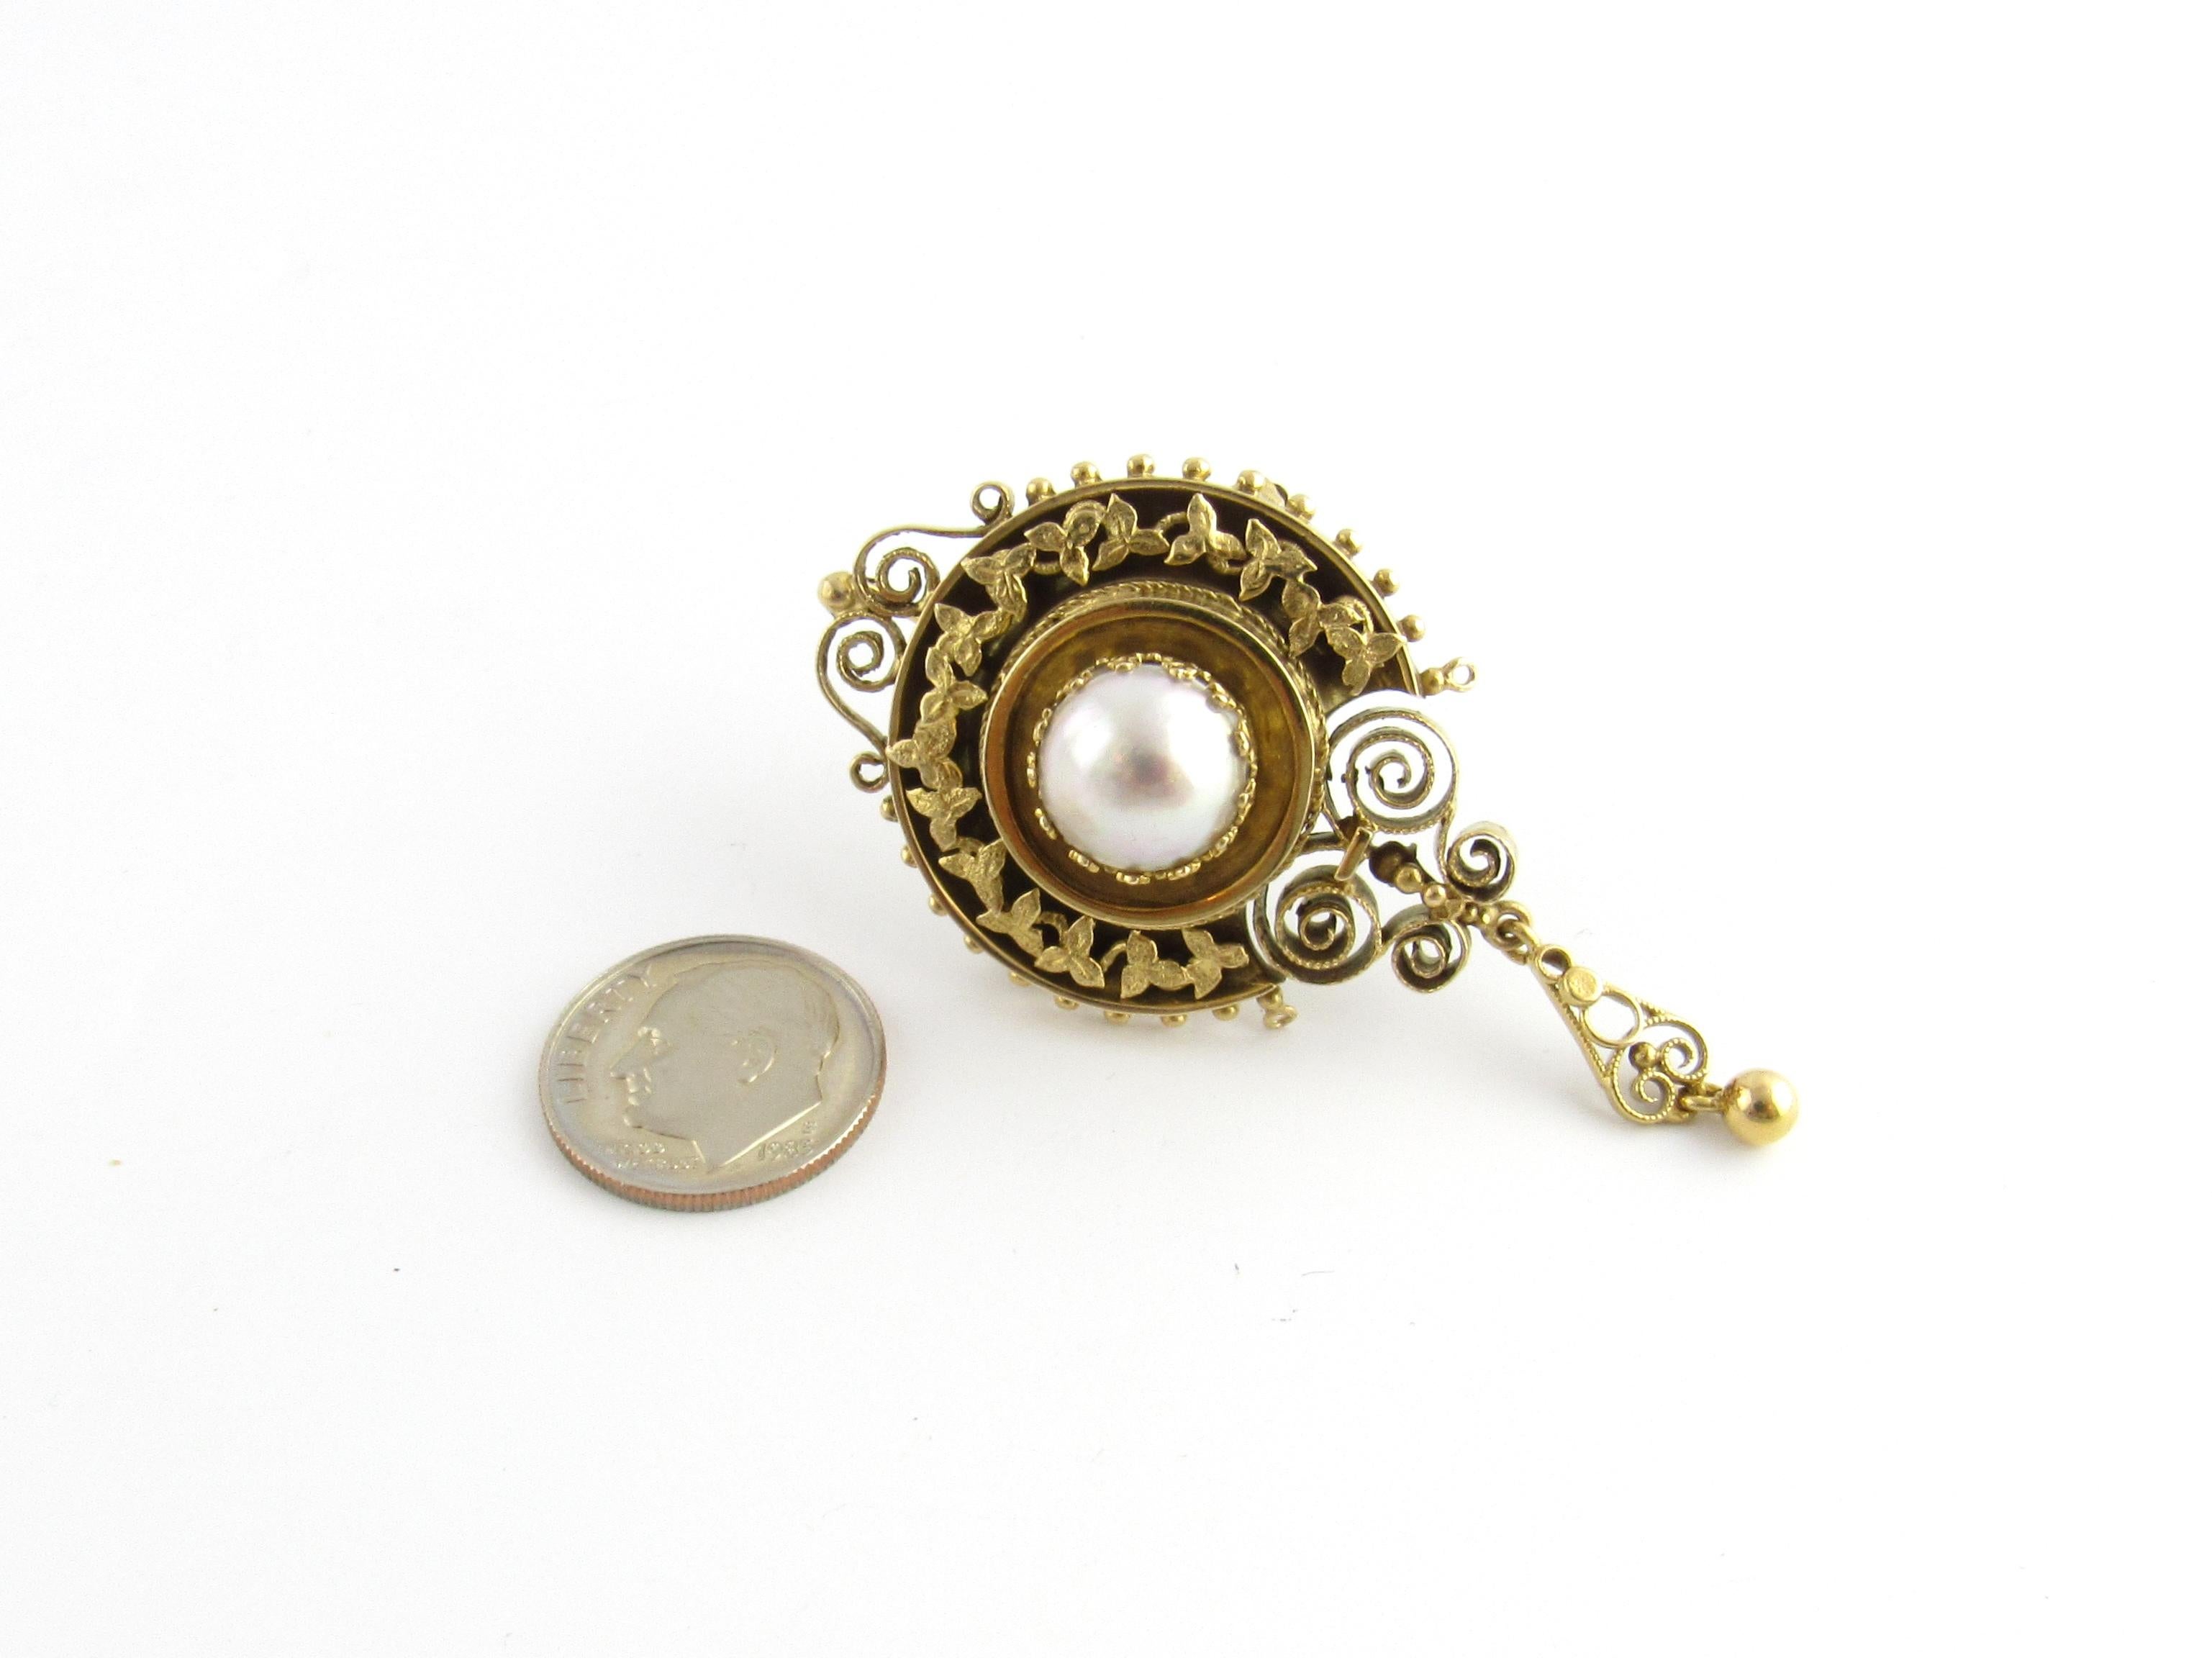 Etruscan Revival 14K Yellow Gold and Mabe Pearl Pin Pendant For Sale 4